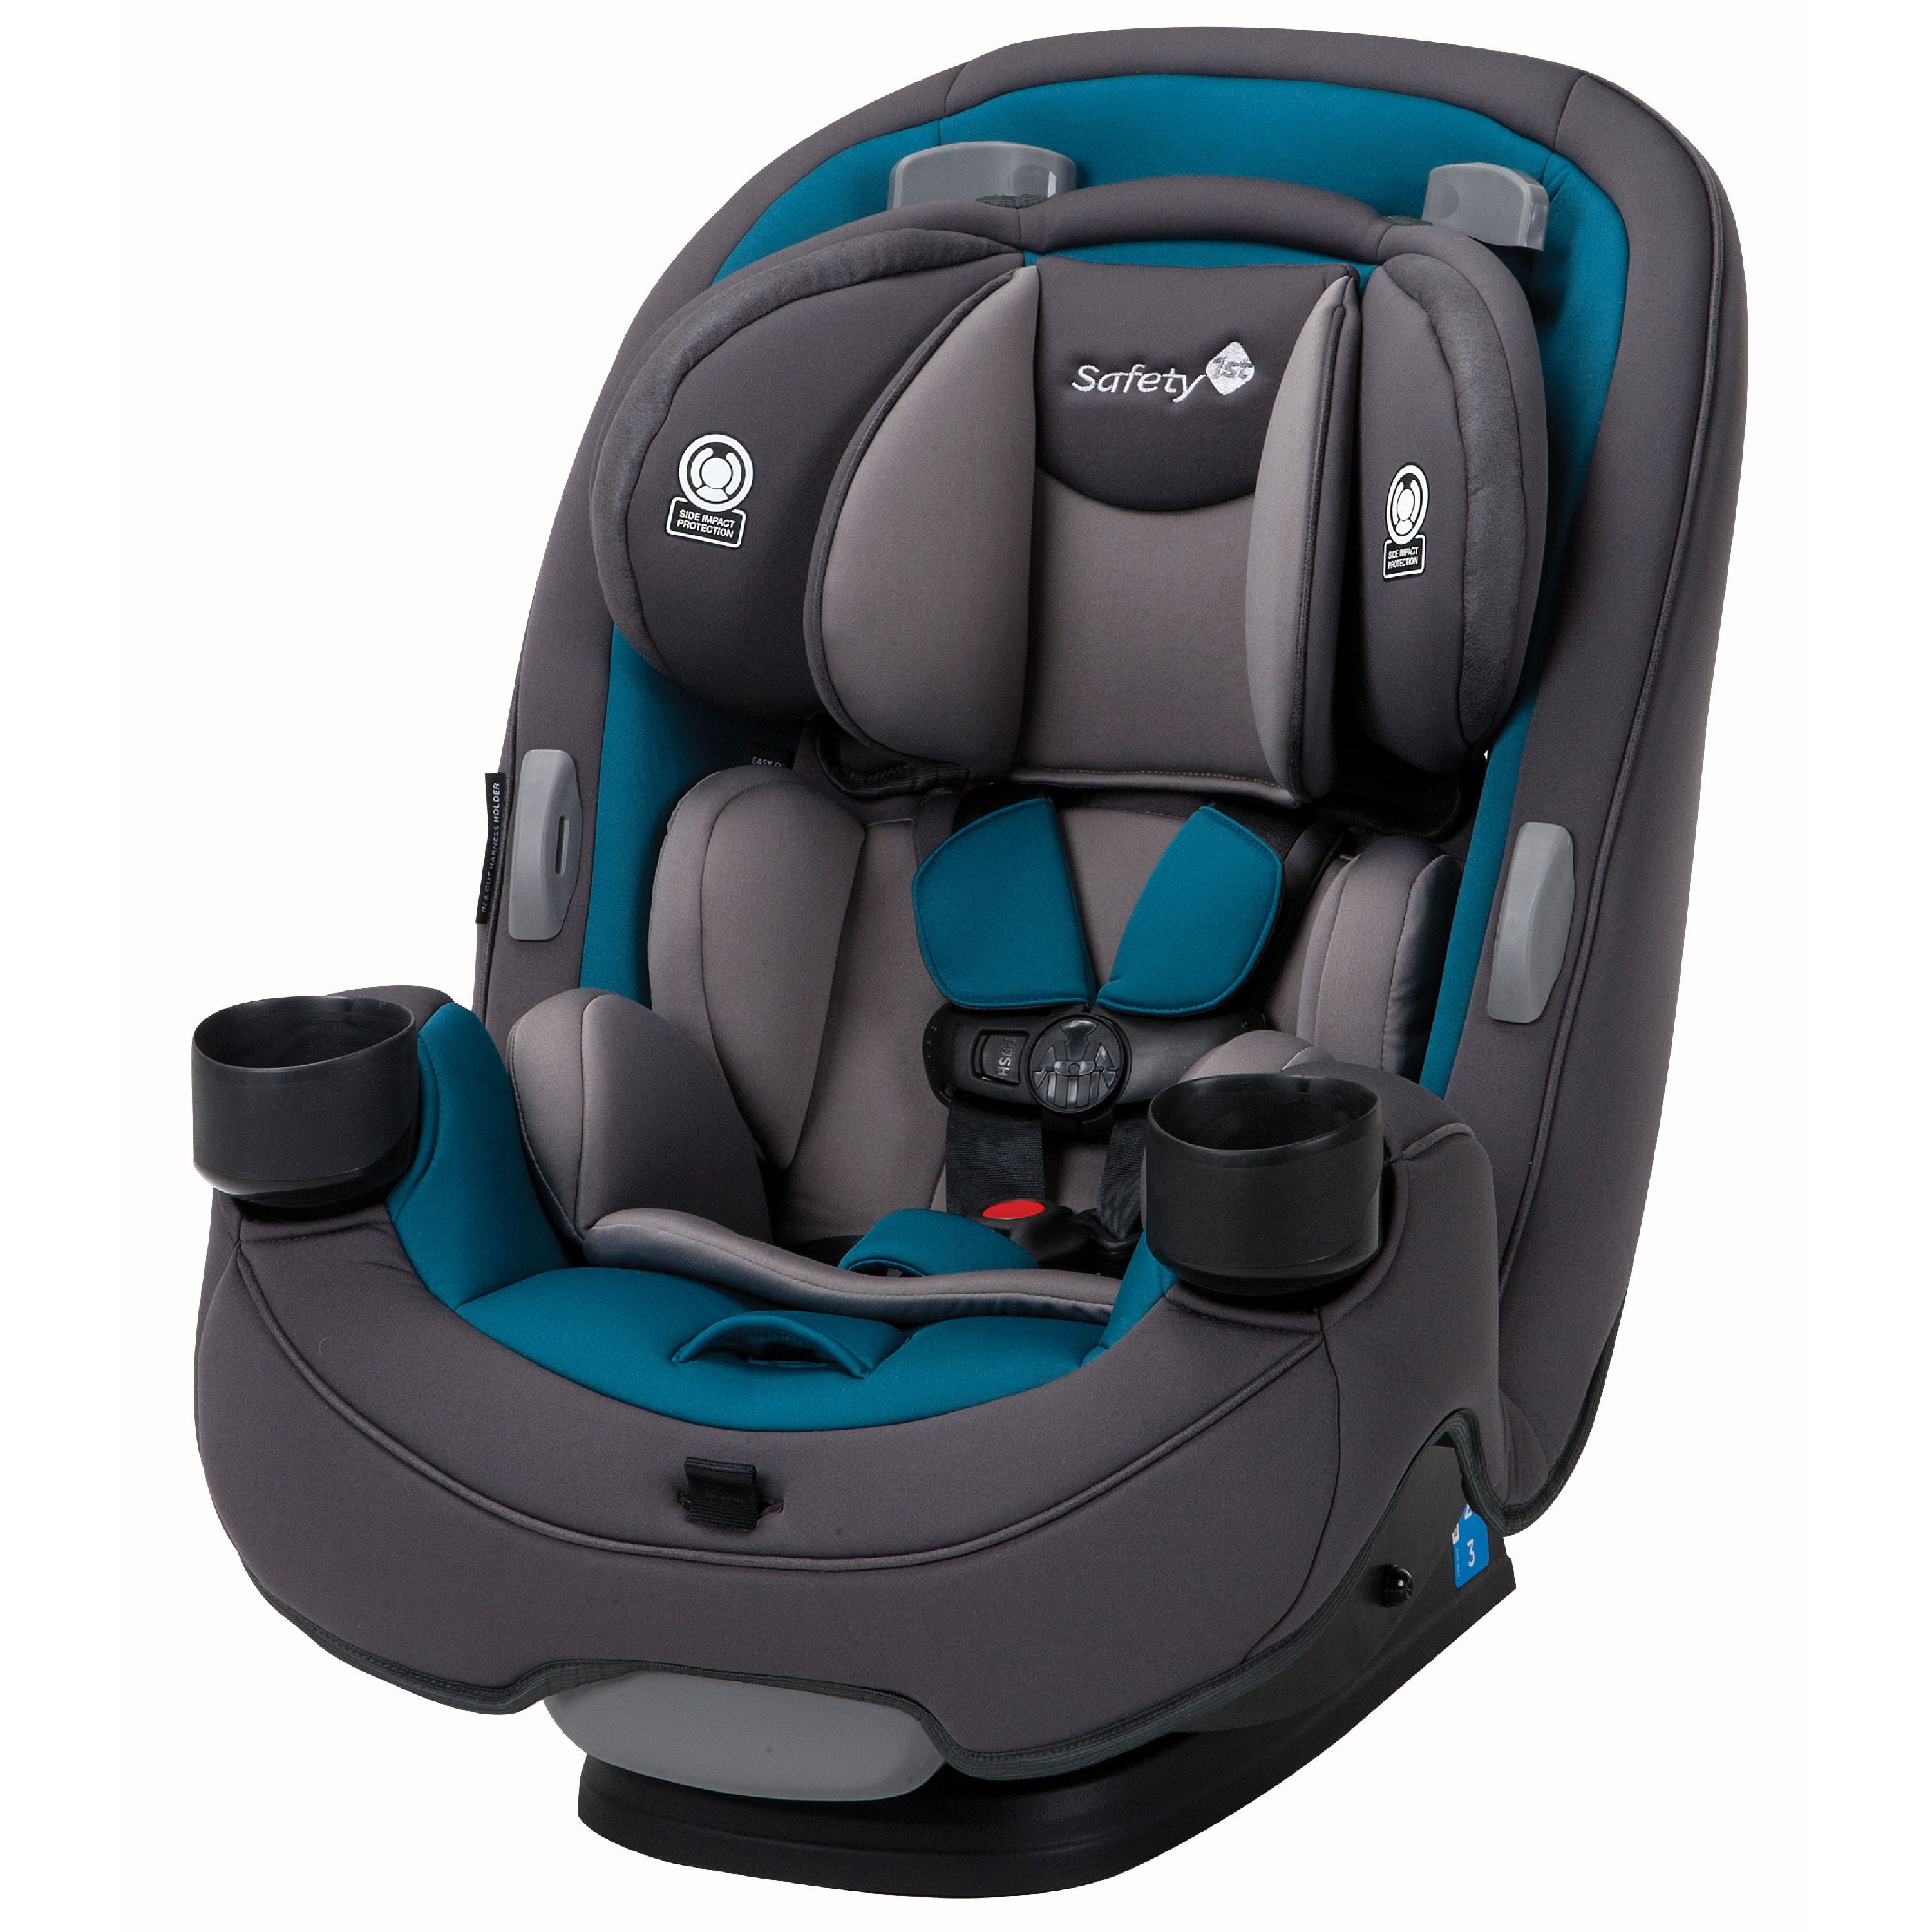 double stroller that fits safety 1st car seat